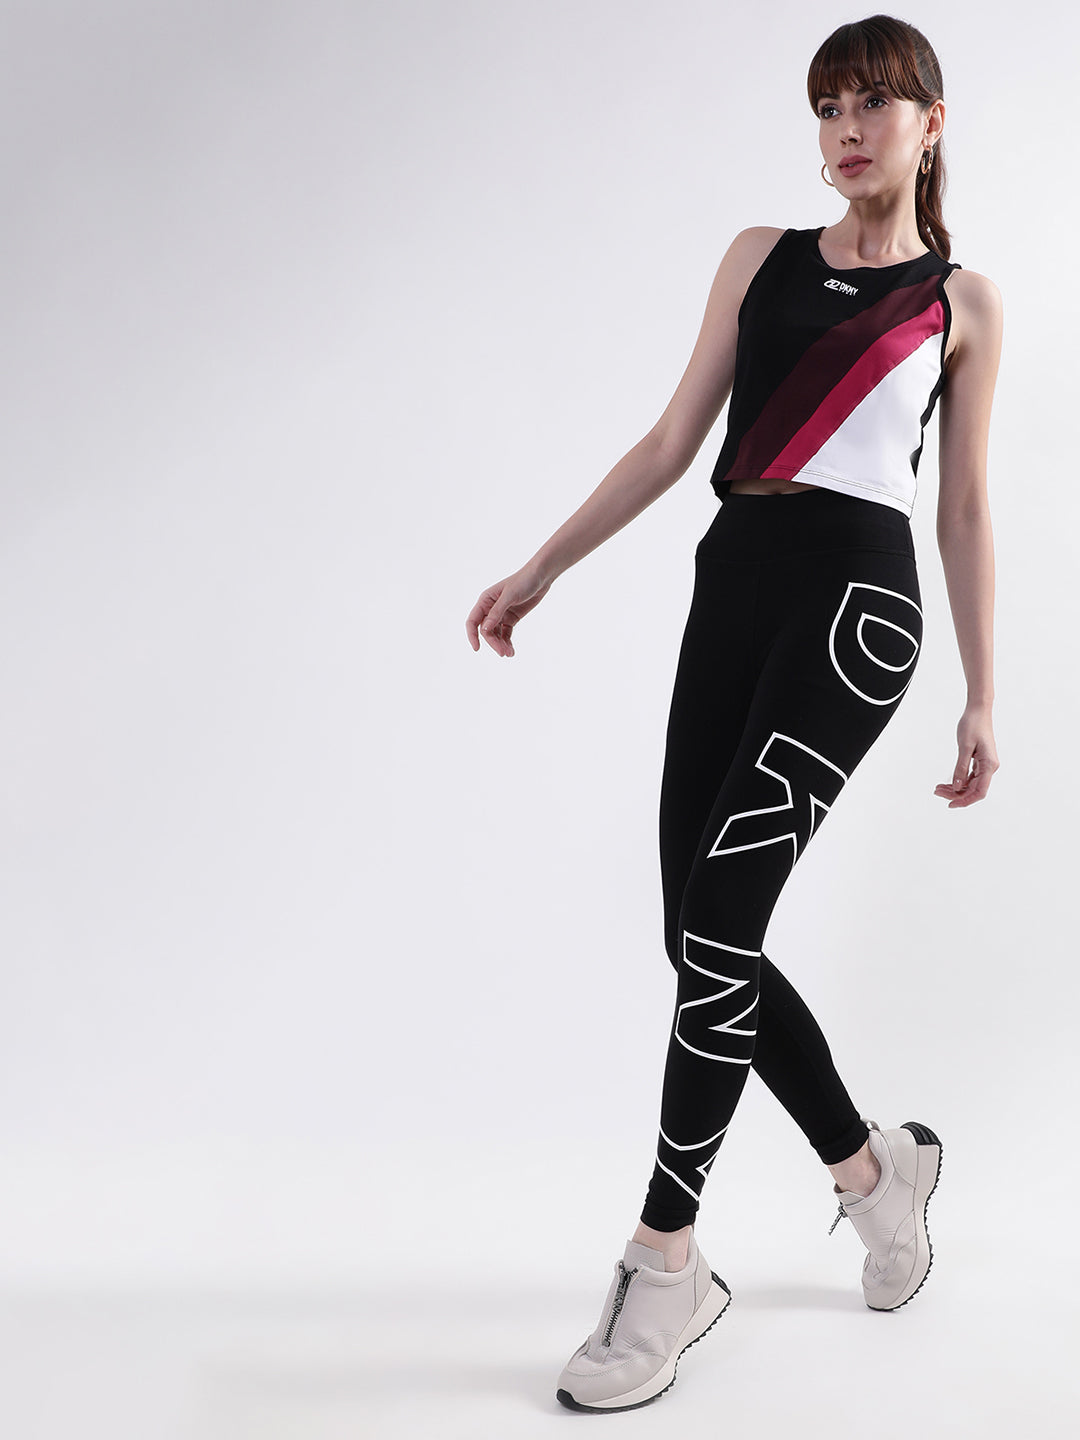 Black and White Abstract High Waisted Leggings | Zazzle | High waisted  leggings, Leggings fashion, Black and white abstract